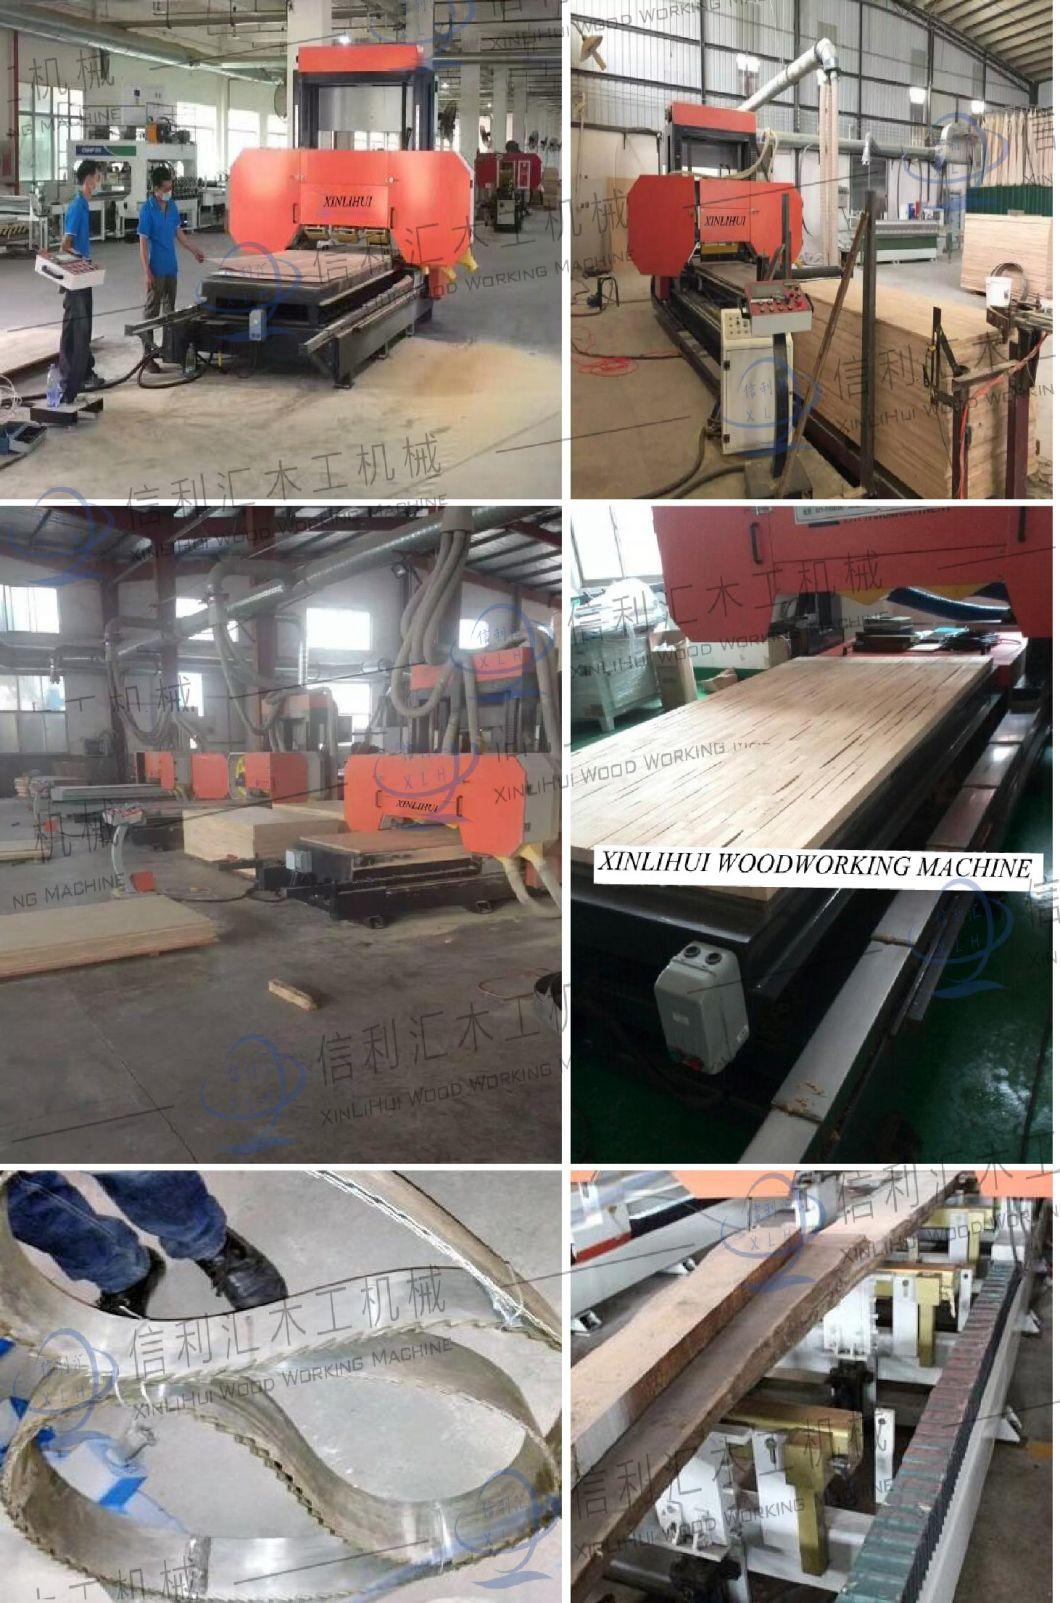 Automatic Horizontal Band Saw Thin-Wood Board Horizontal Band Saw Gantry Horizontal Band Saw Woodworking Sheet Band Saw a Vacuum Table, Dust Collection System,